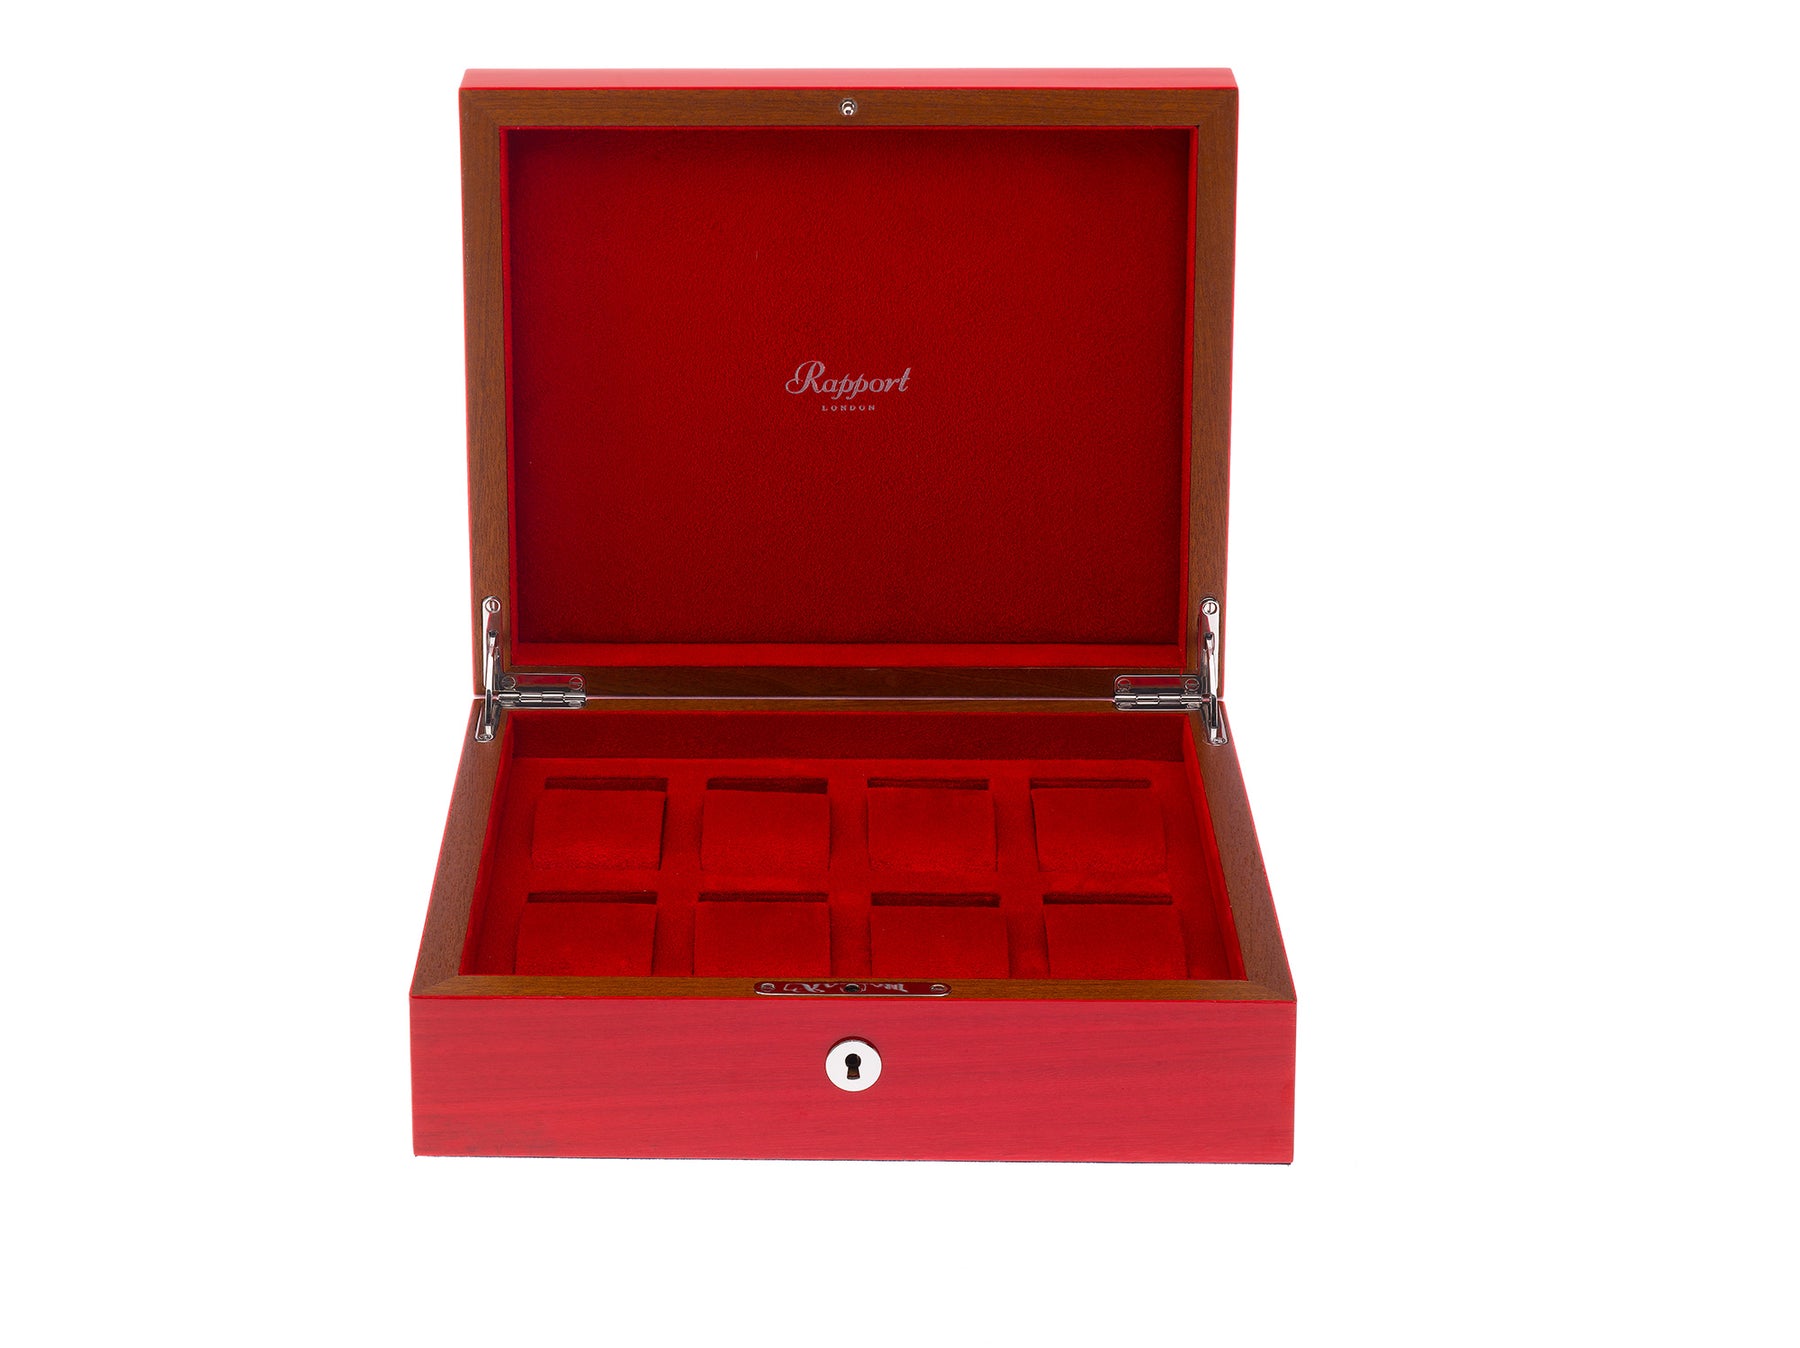 rapport-8-piece-watch-box-heritage-red-l421 – 2.0